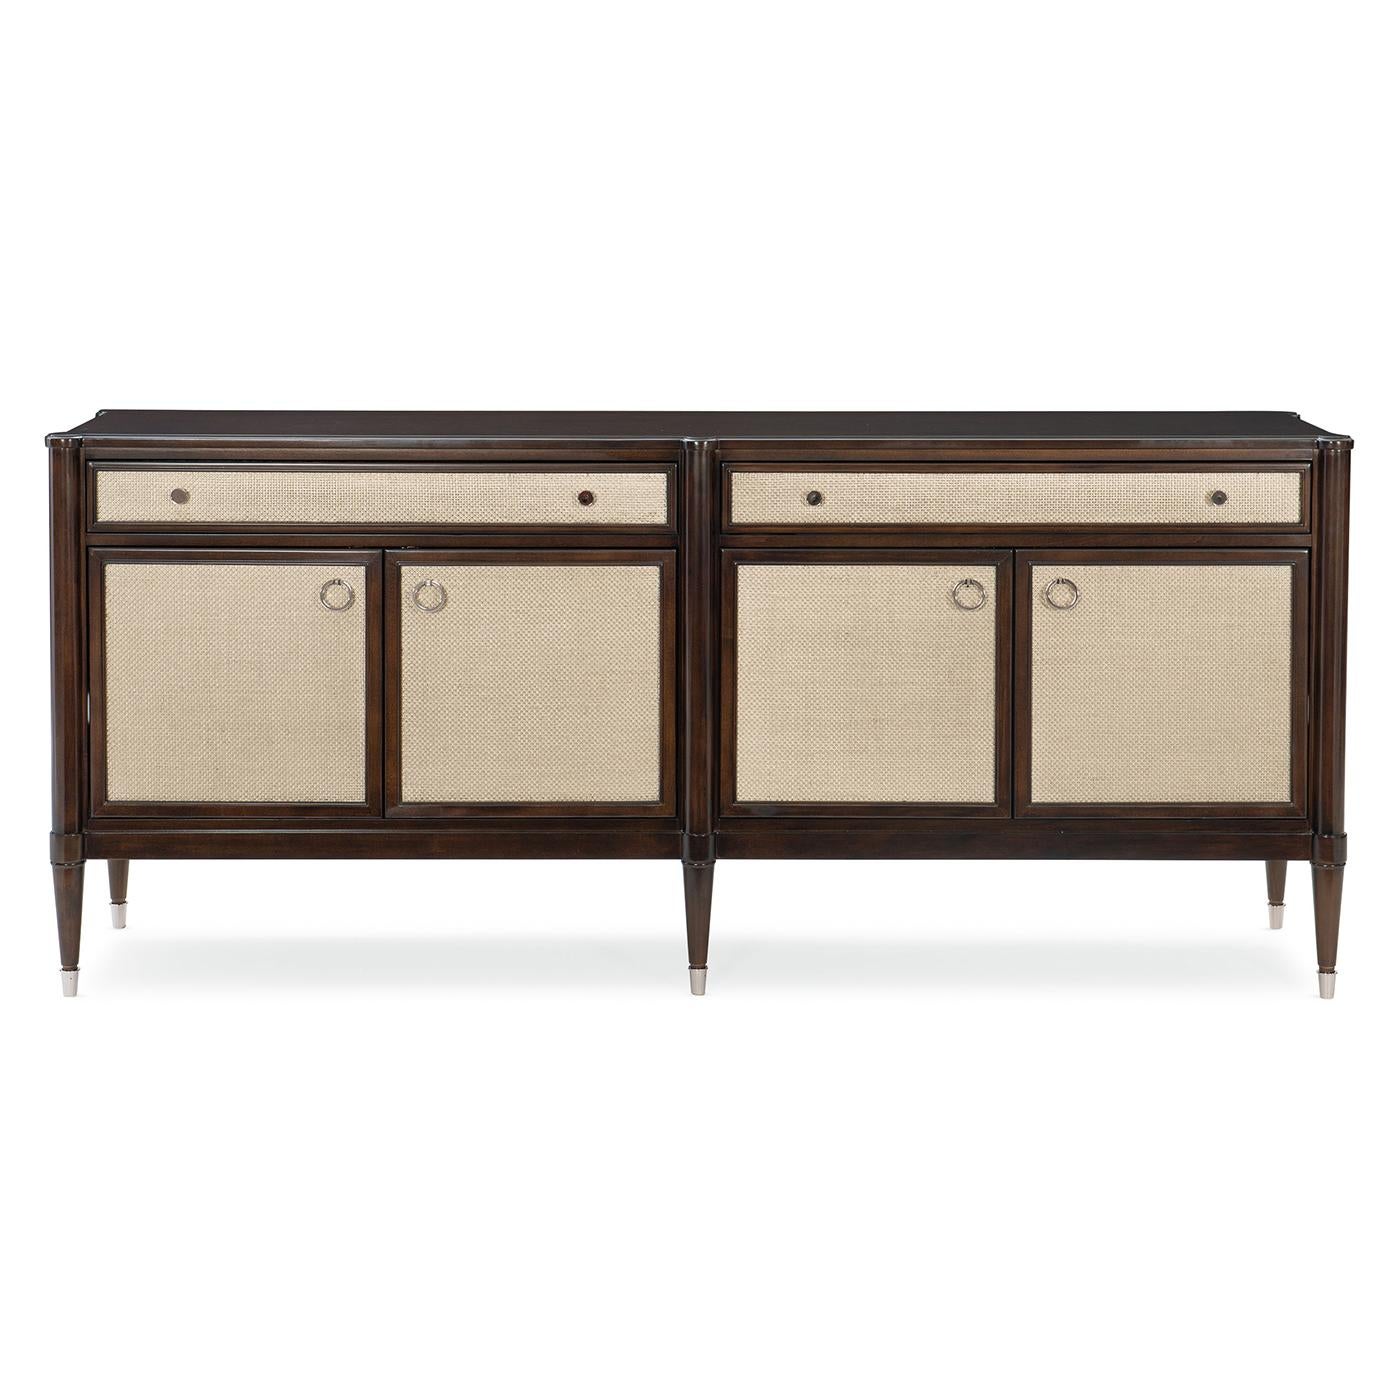 The updated Neo Classic Buffet is a modern interpretation of the traditional sideboard. An attractive antique design that will easily blend with other pieces while its versatility allows you to use it in any room. This sideboard is elegant but not